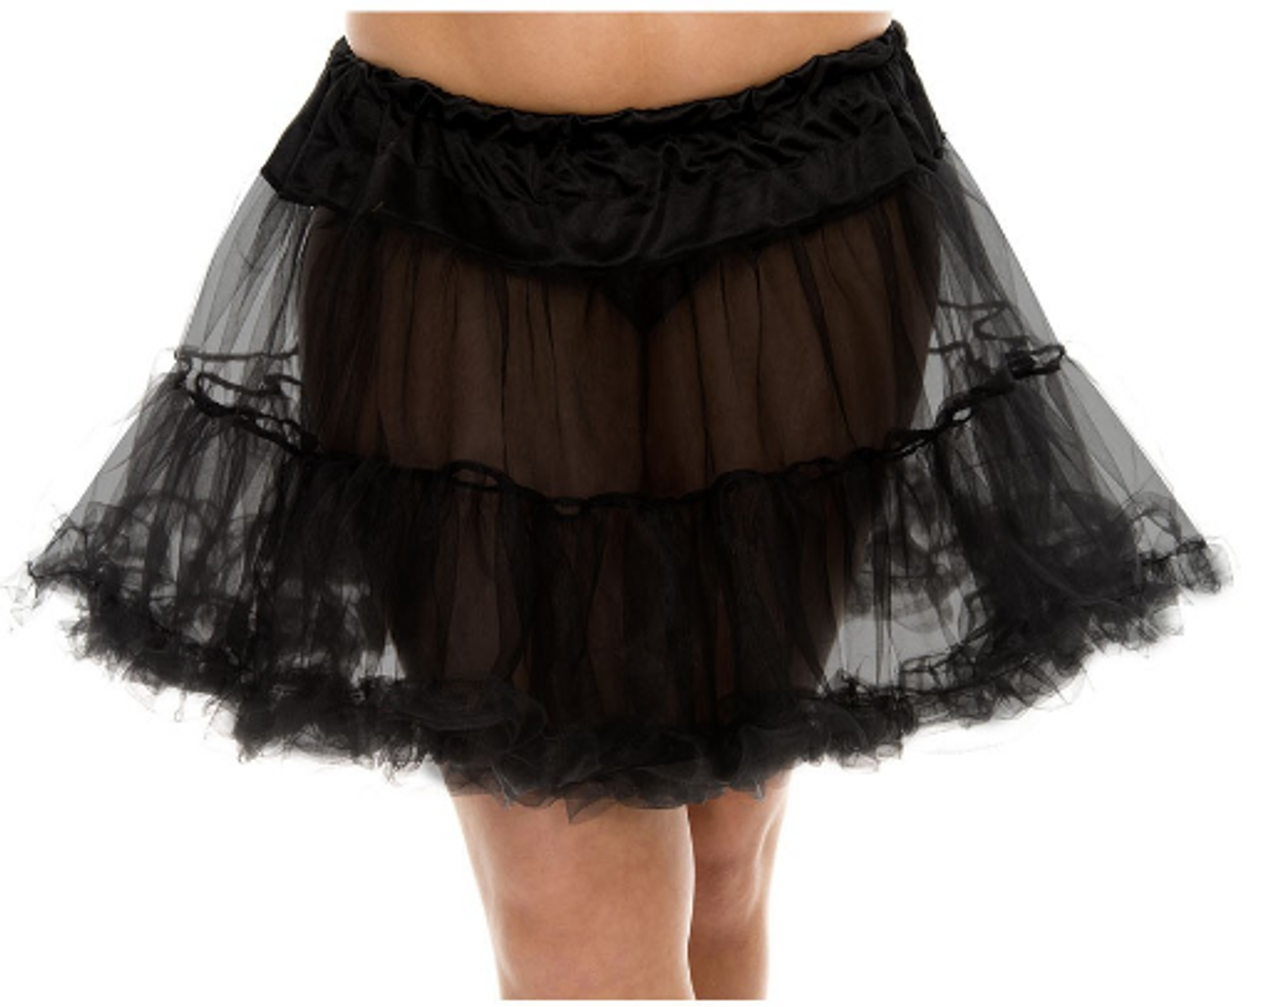 Tulle Petticoat Queen Size - 3 Colours! - The Costume Shoppe